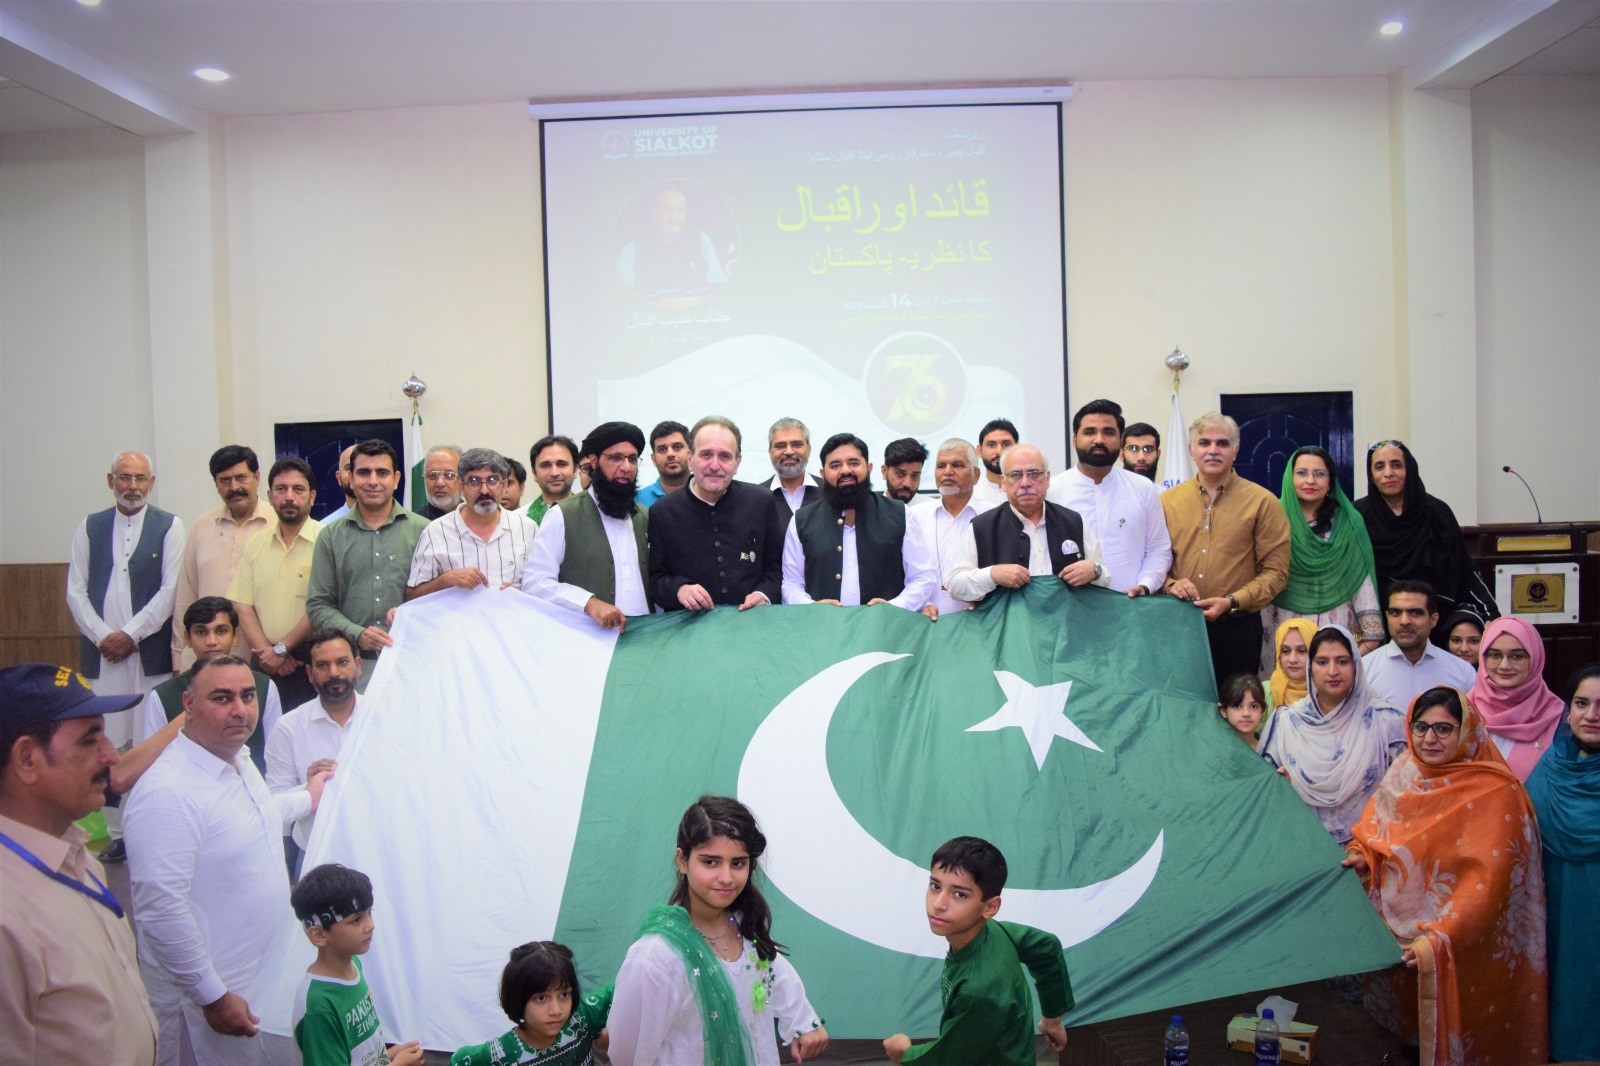 USKT Marks the 76th Independence Day of Pakistan with a Grand Celebration